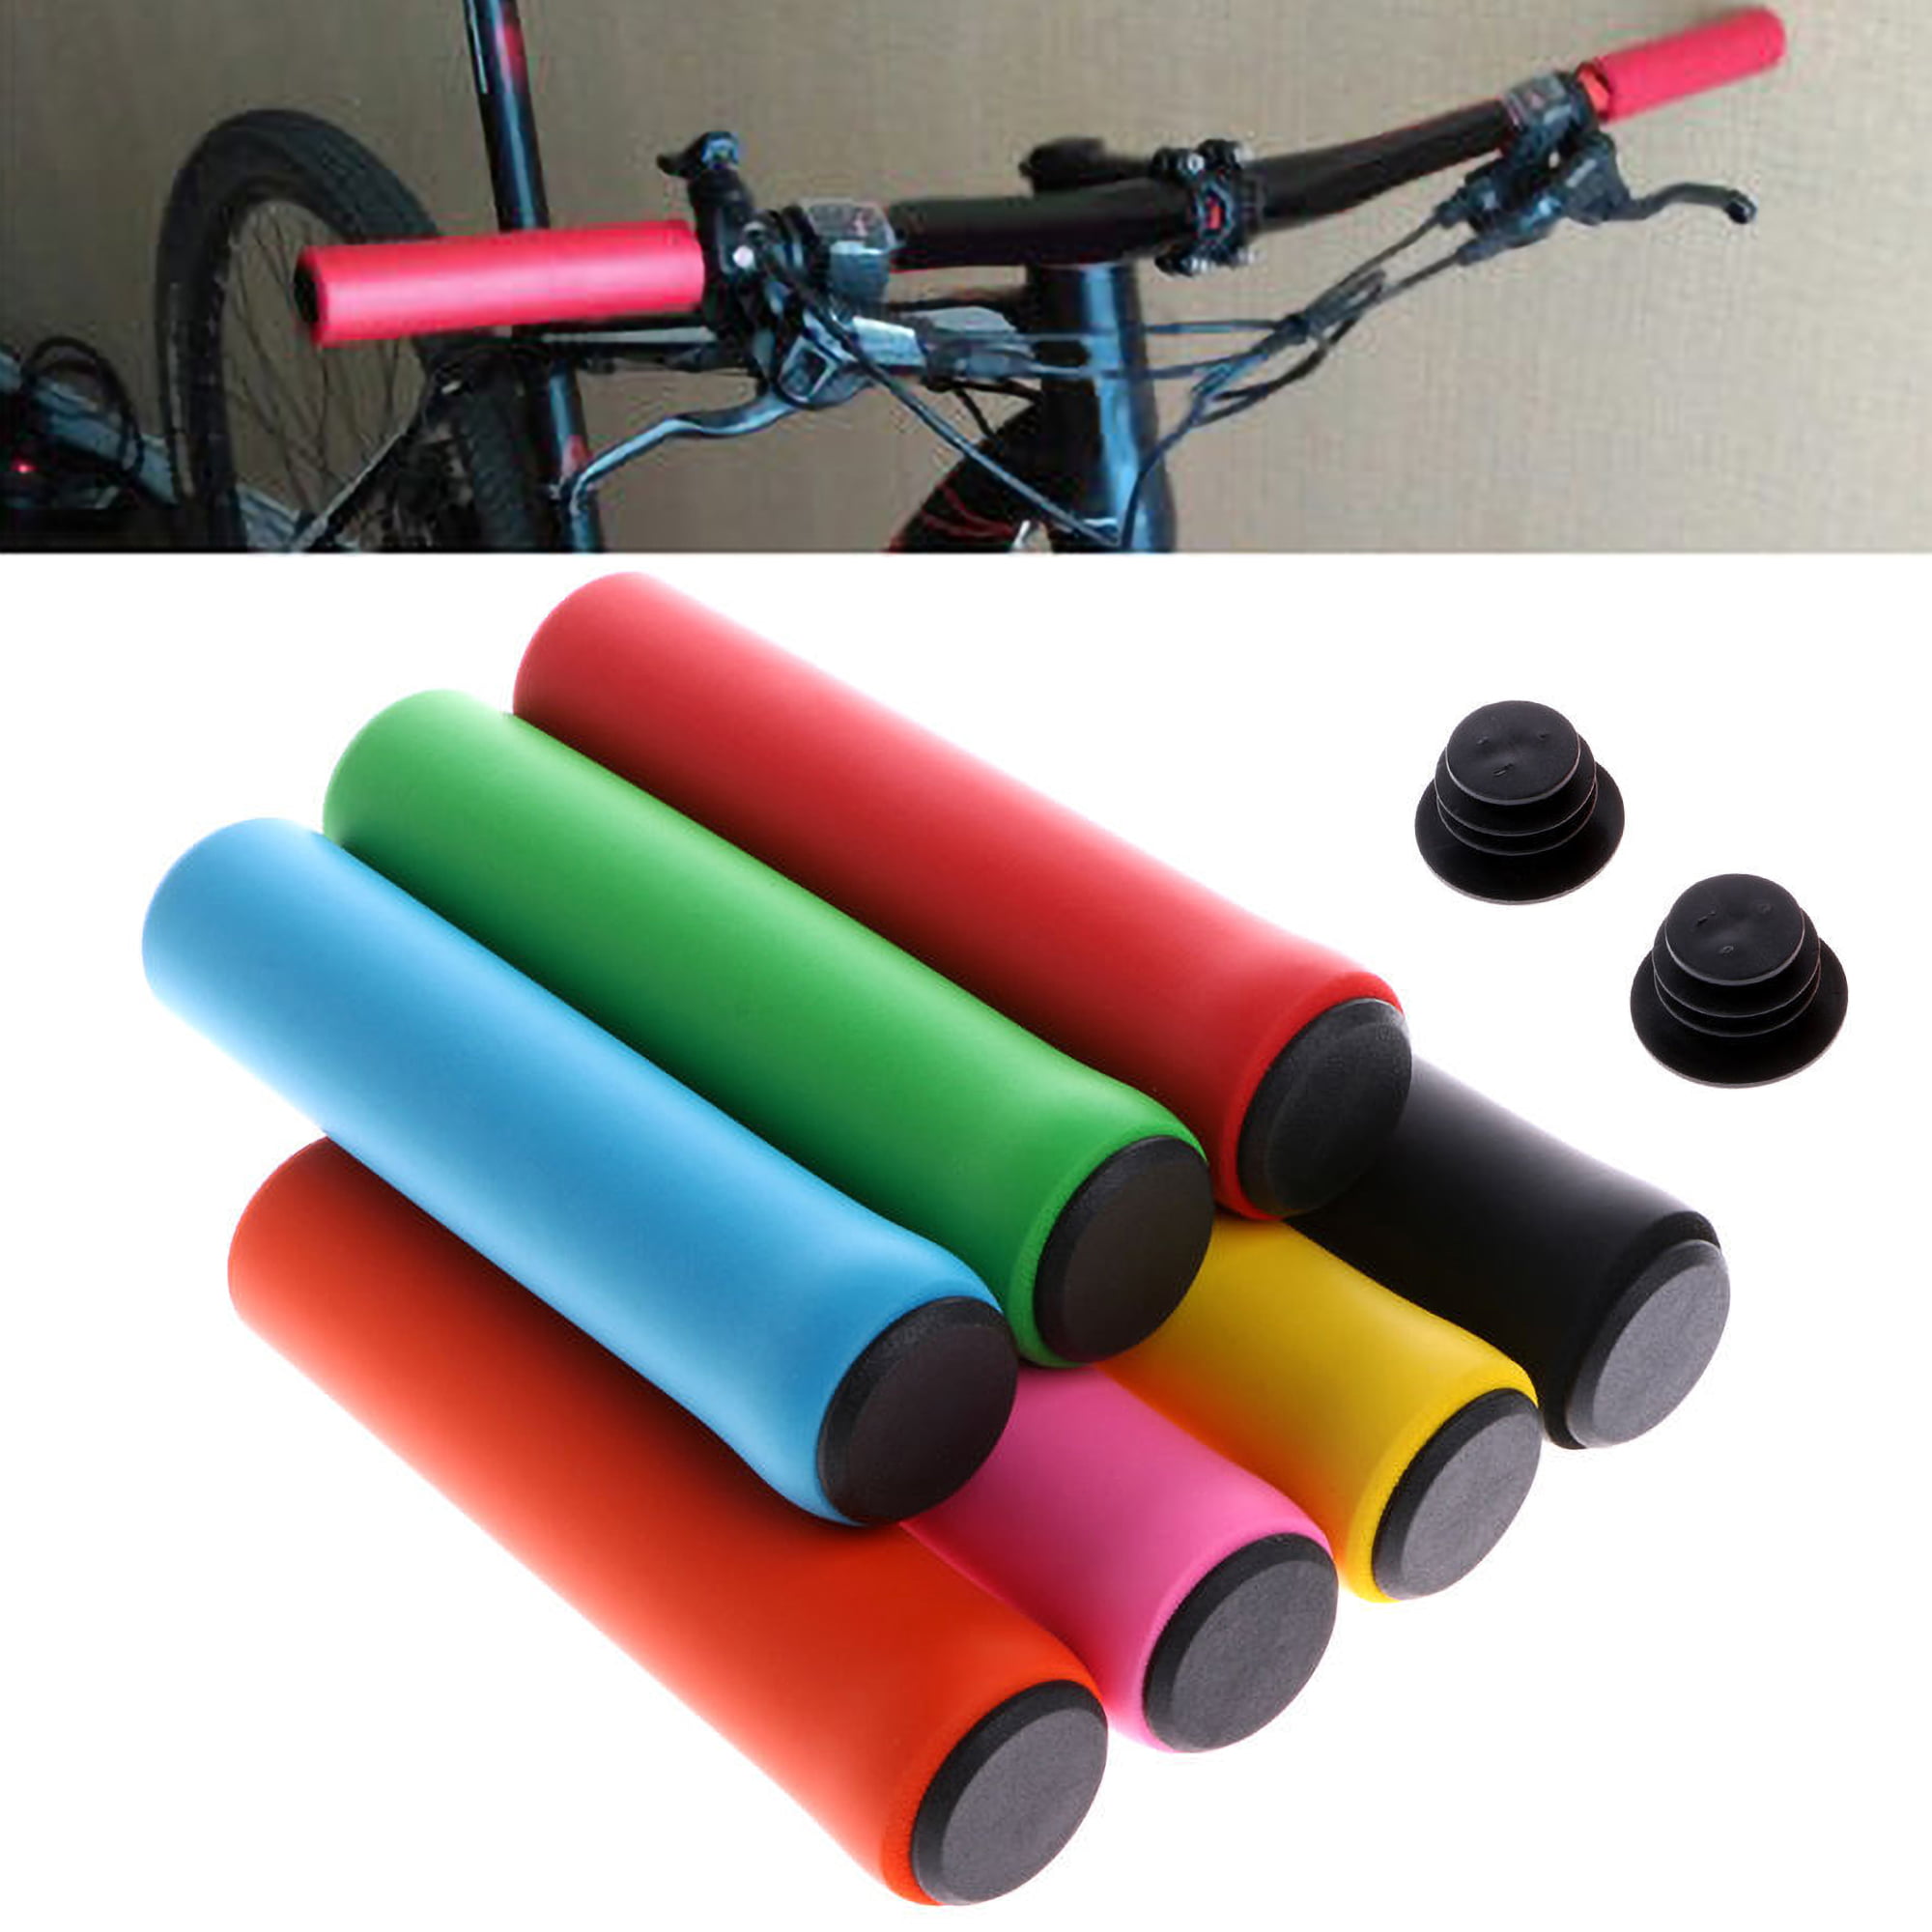 Bike Handle Grips,Non-Slip Bicycle Grip,Dual Lock-on Bicycle Handlebar Grips,Bicycle Parts for Mountain Road Bikes MTB 